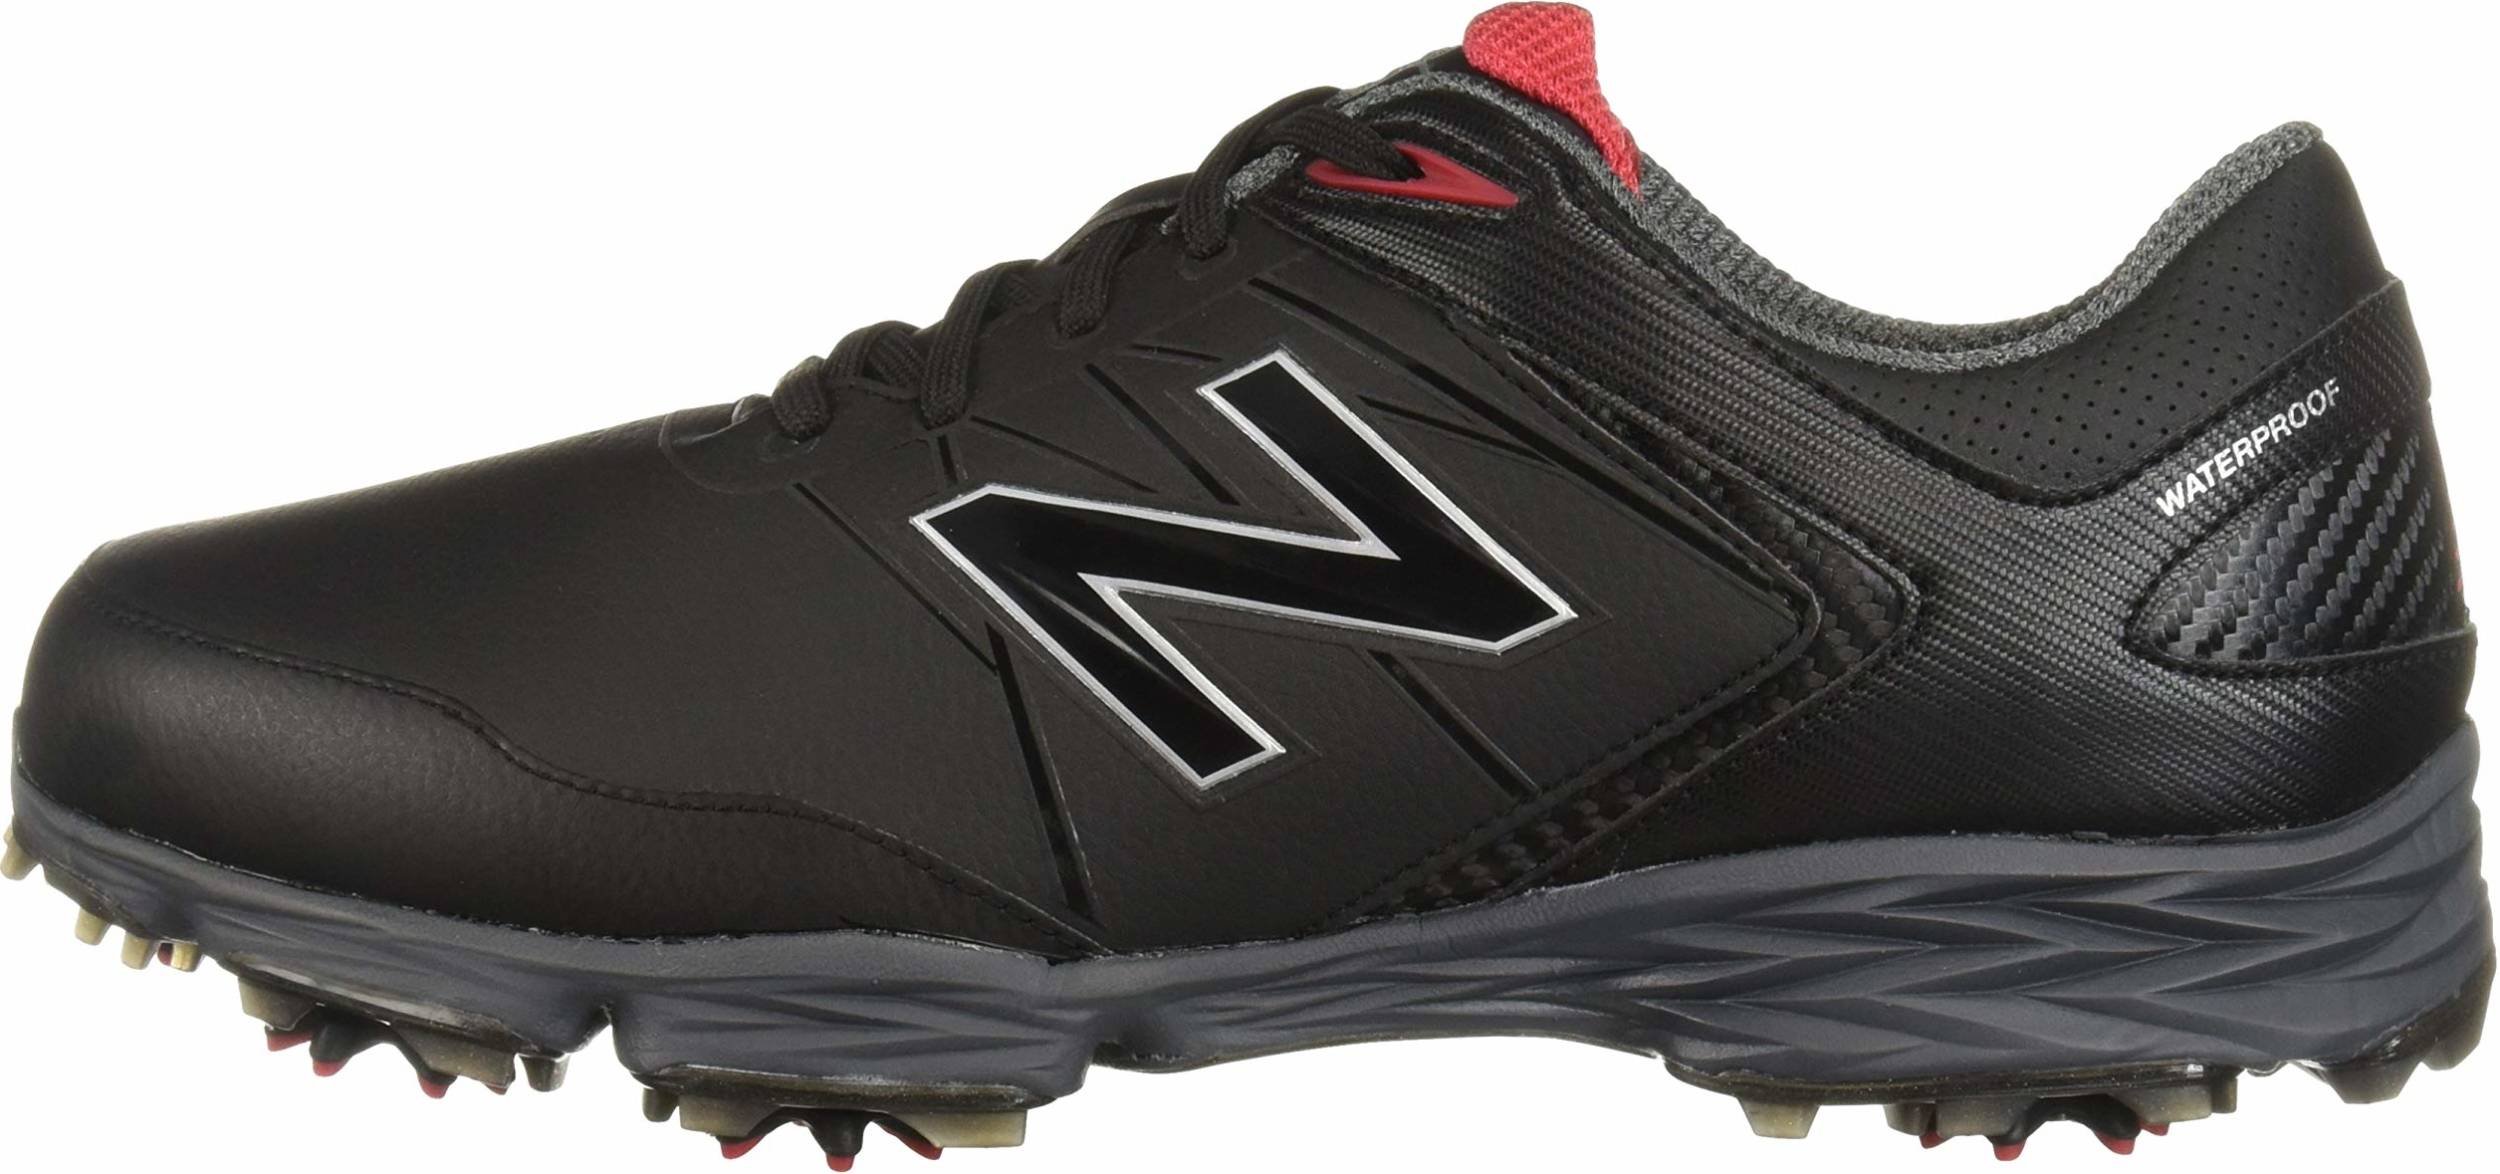 Review of New Balance Striker 